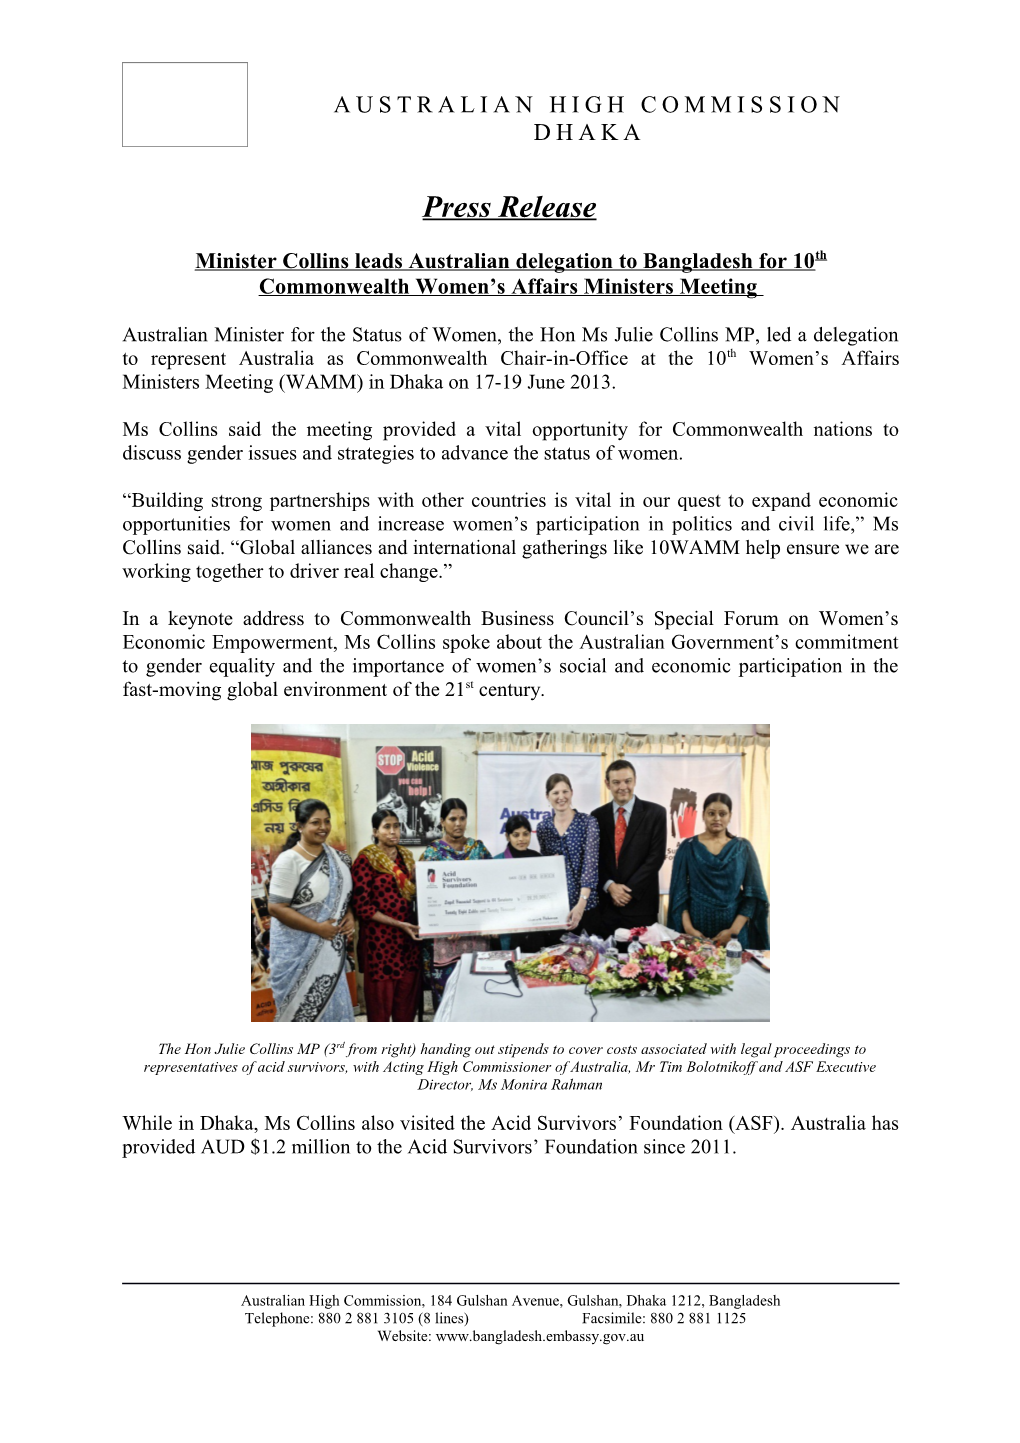 Minister Collins Leads Australian Delegation to Bangladesh for 10Th Commonwealth Women